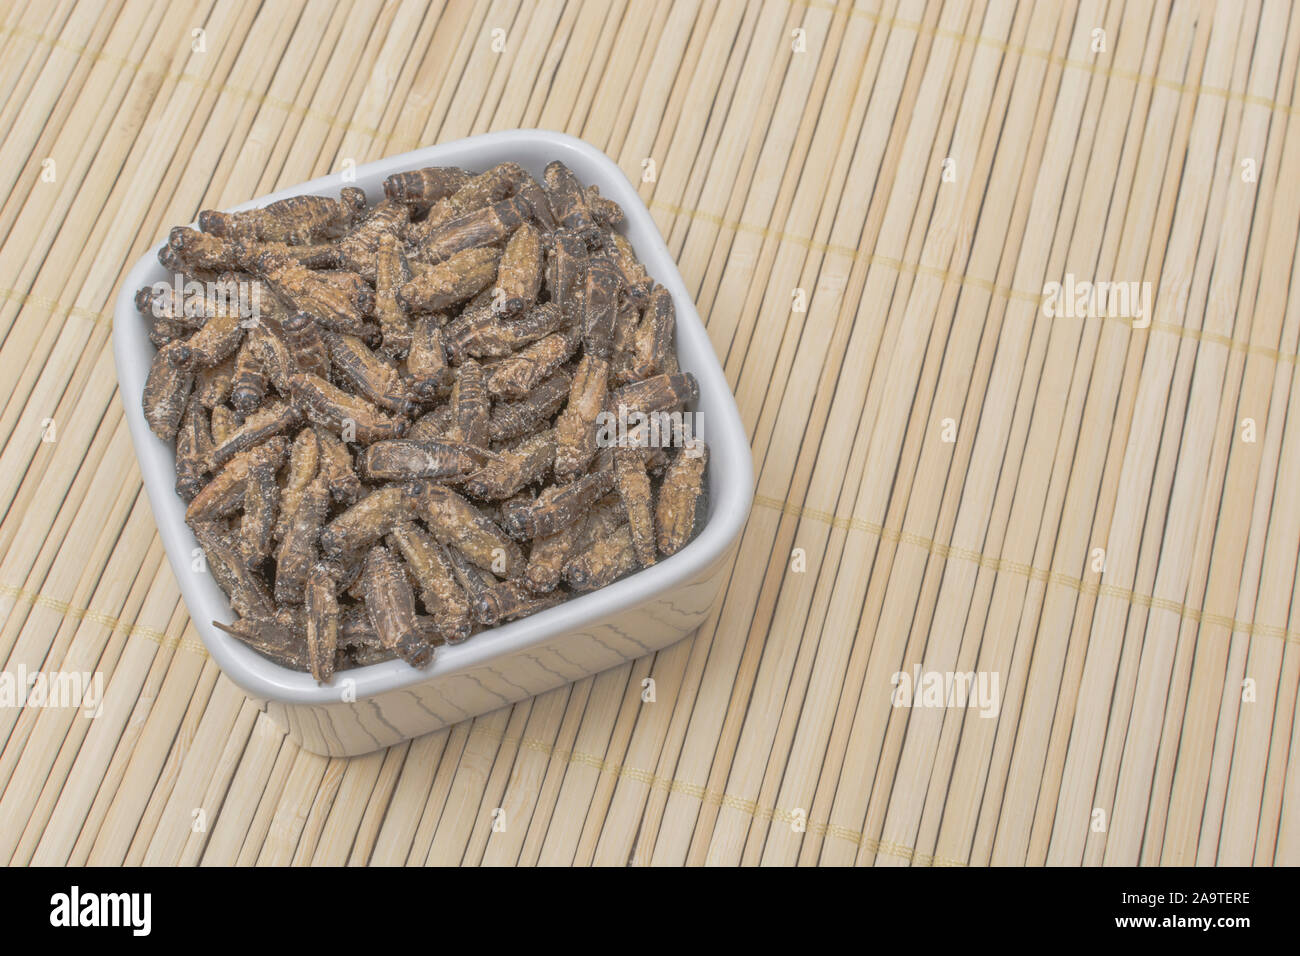 Edible insects - salted Small Crickets possibly Gryllus assimilis - on bamboo mat. Entomophagy, edible bugs, insect superfoods, insects as novel foods Stock Photo